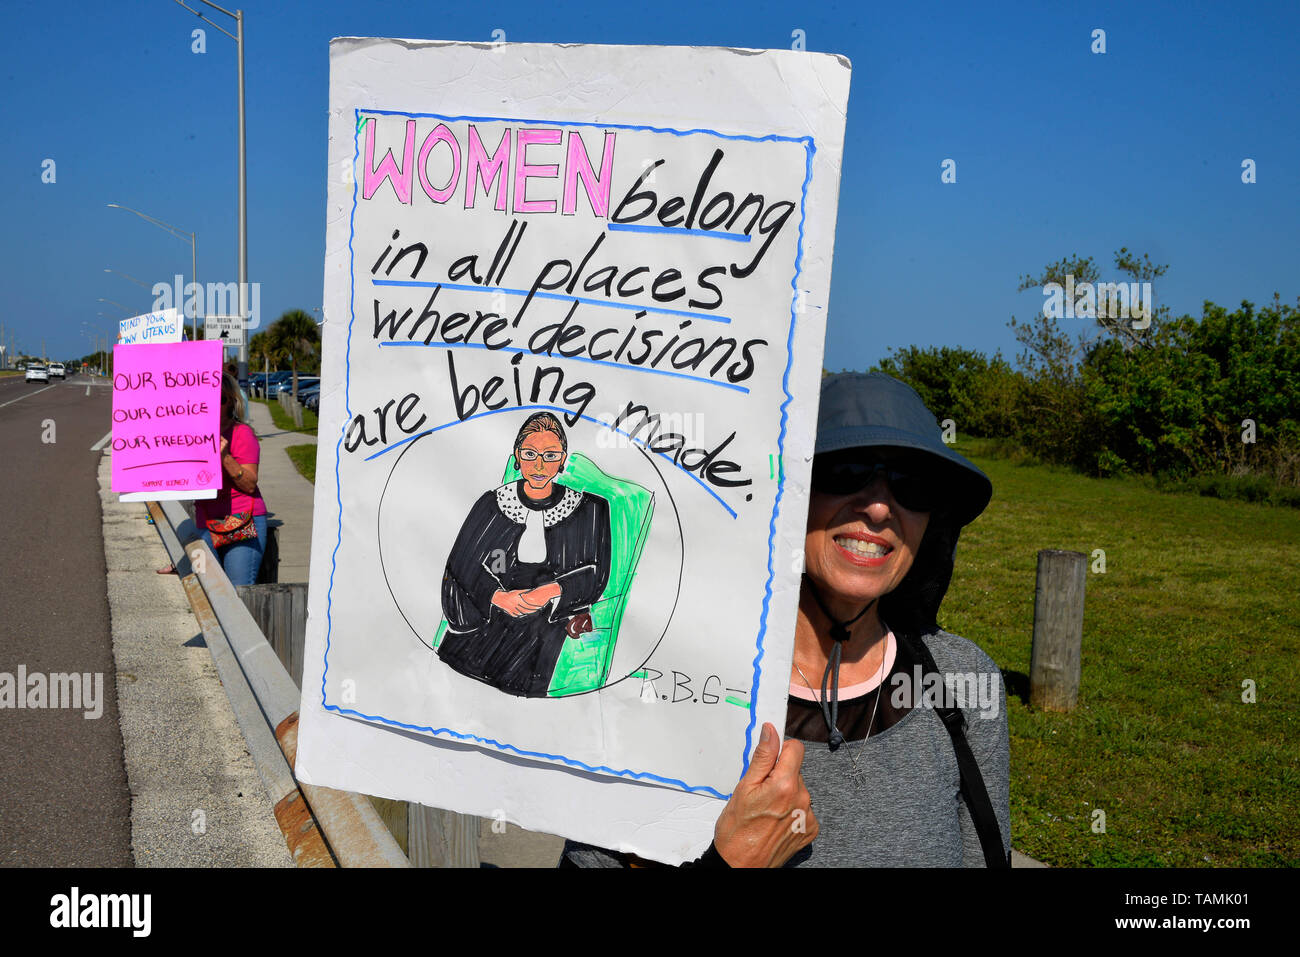 Brevard County, Melbourne. Florida. May 26, 2019. As with other city’s across America woman came out in force to protest against having their rights taken away from them regarding abortion. Home made signs stating their opinion of law makers were waved at passing motorist on the Eau Gallie Causeway. The Brevard Woman’s March group stated “We are fired up and letting the world know where we stand. WE WON’T GO BACK! They're coming for women. They're coming for doctors. They're coming for Roe.” Photo Credit Julian Leek / Alamy Live News Stock Photo